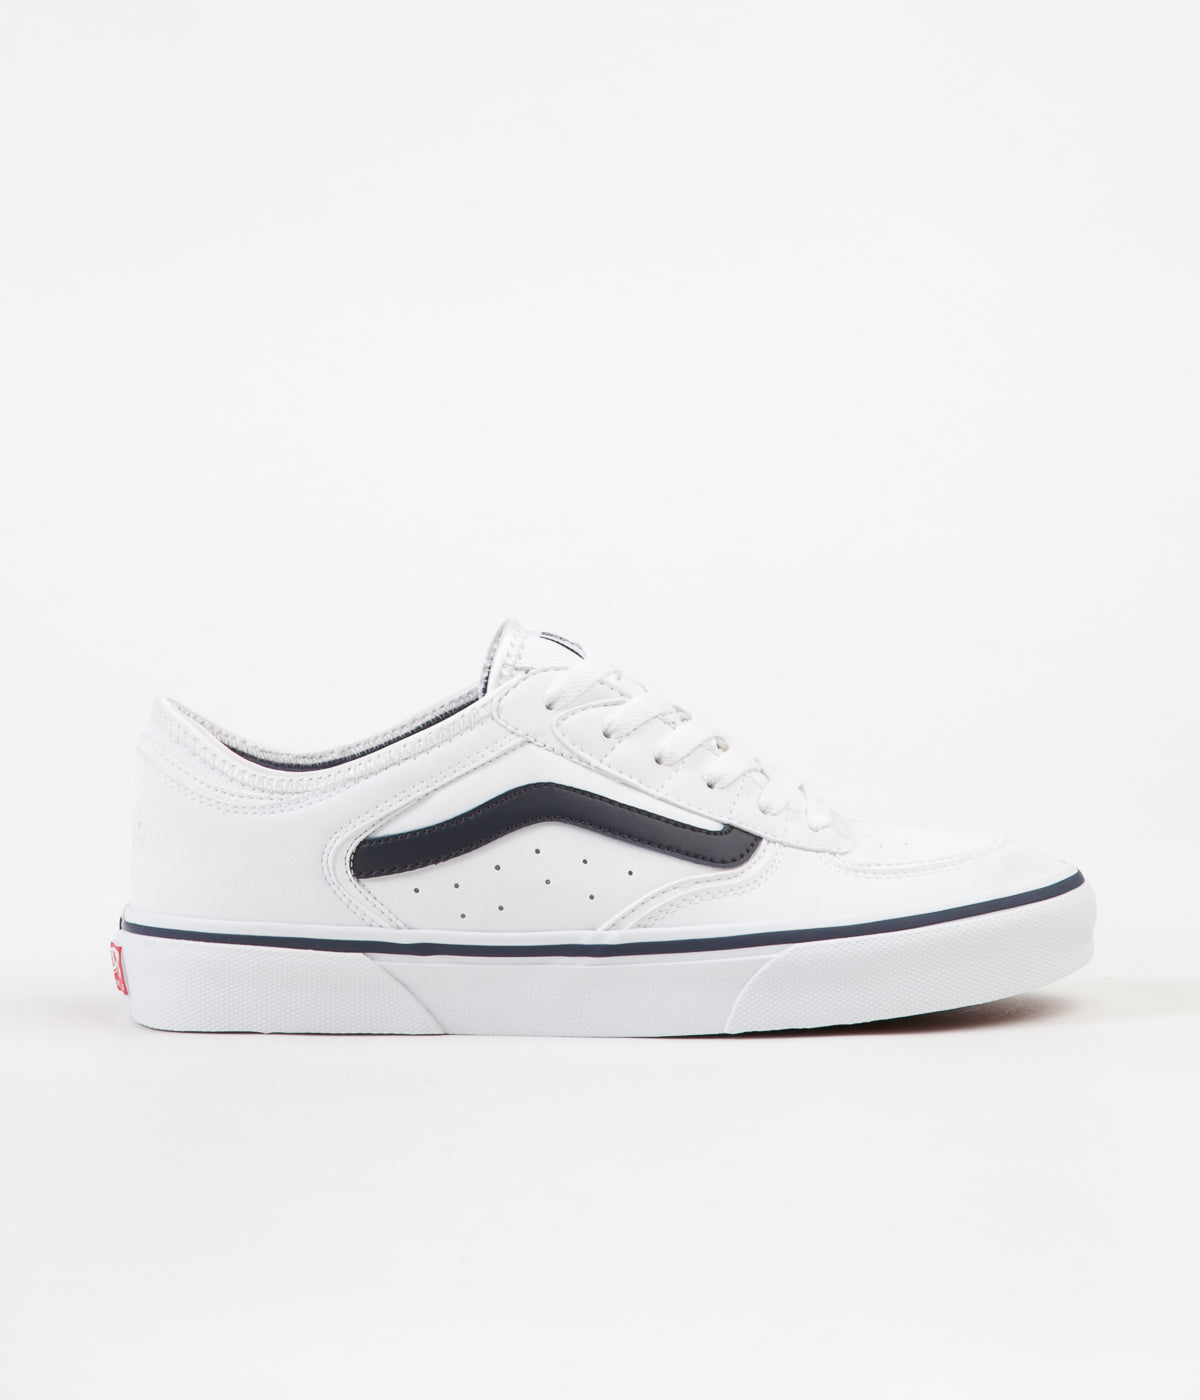 rowley classic lx - thecridders 